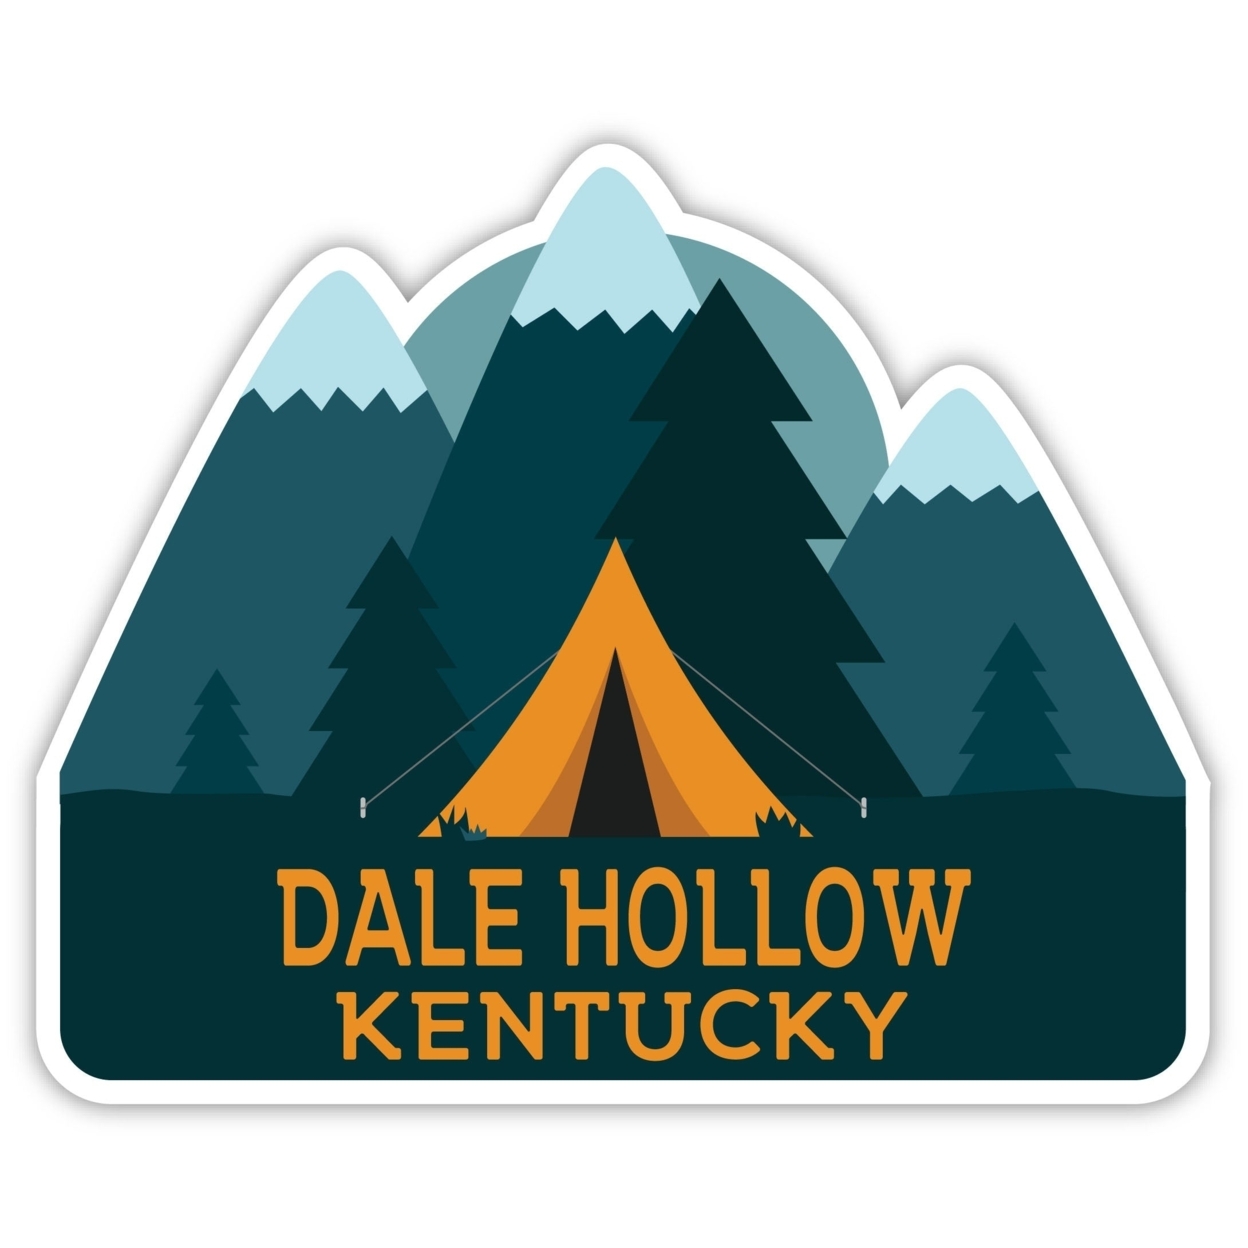 Dale Hollow Kentucky Souvenir Decorative Stickers (Choose Theme And Size) - 4-Pack, 10-Inch, Tent